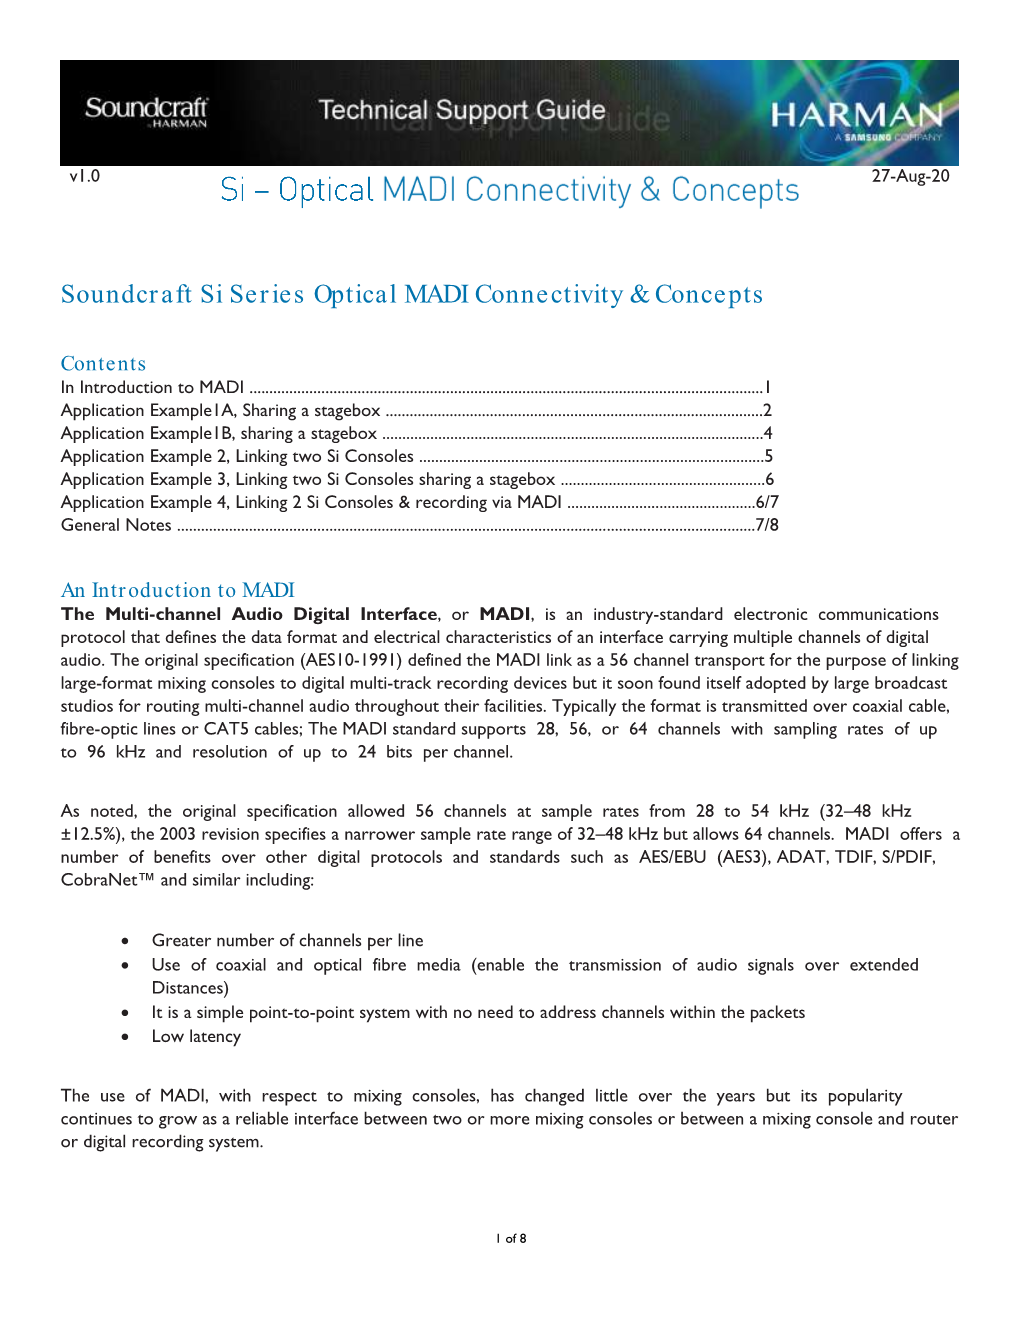 Si – Optical MADI Connectivity & Concepts